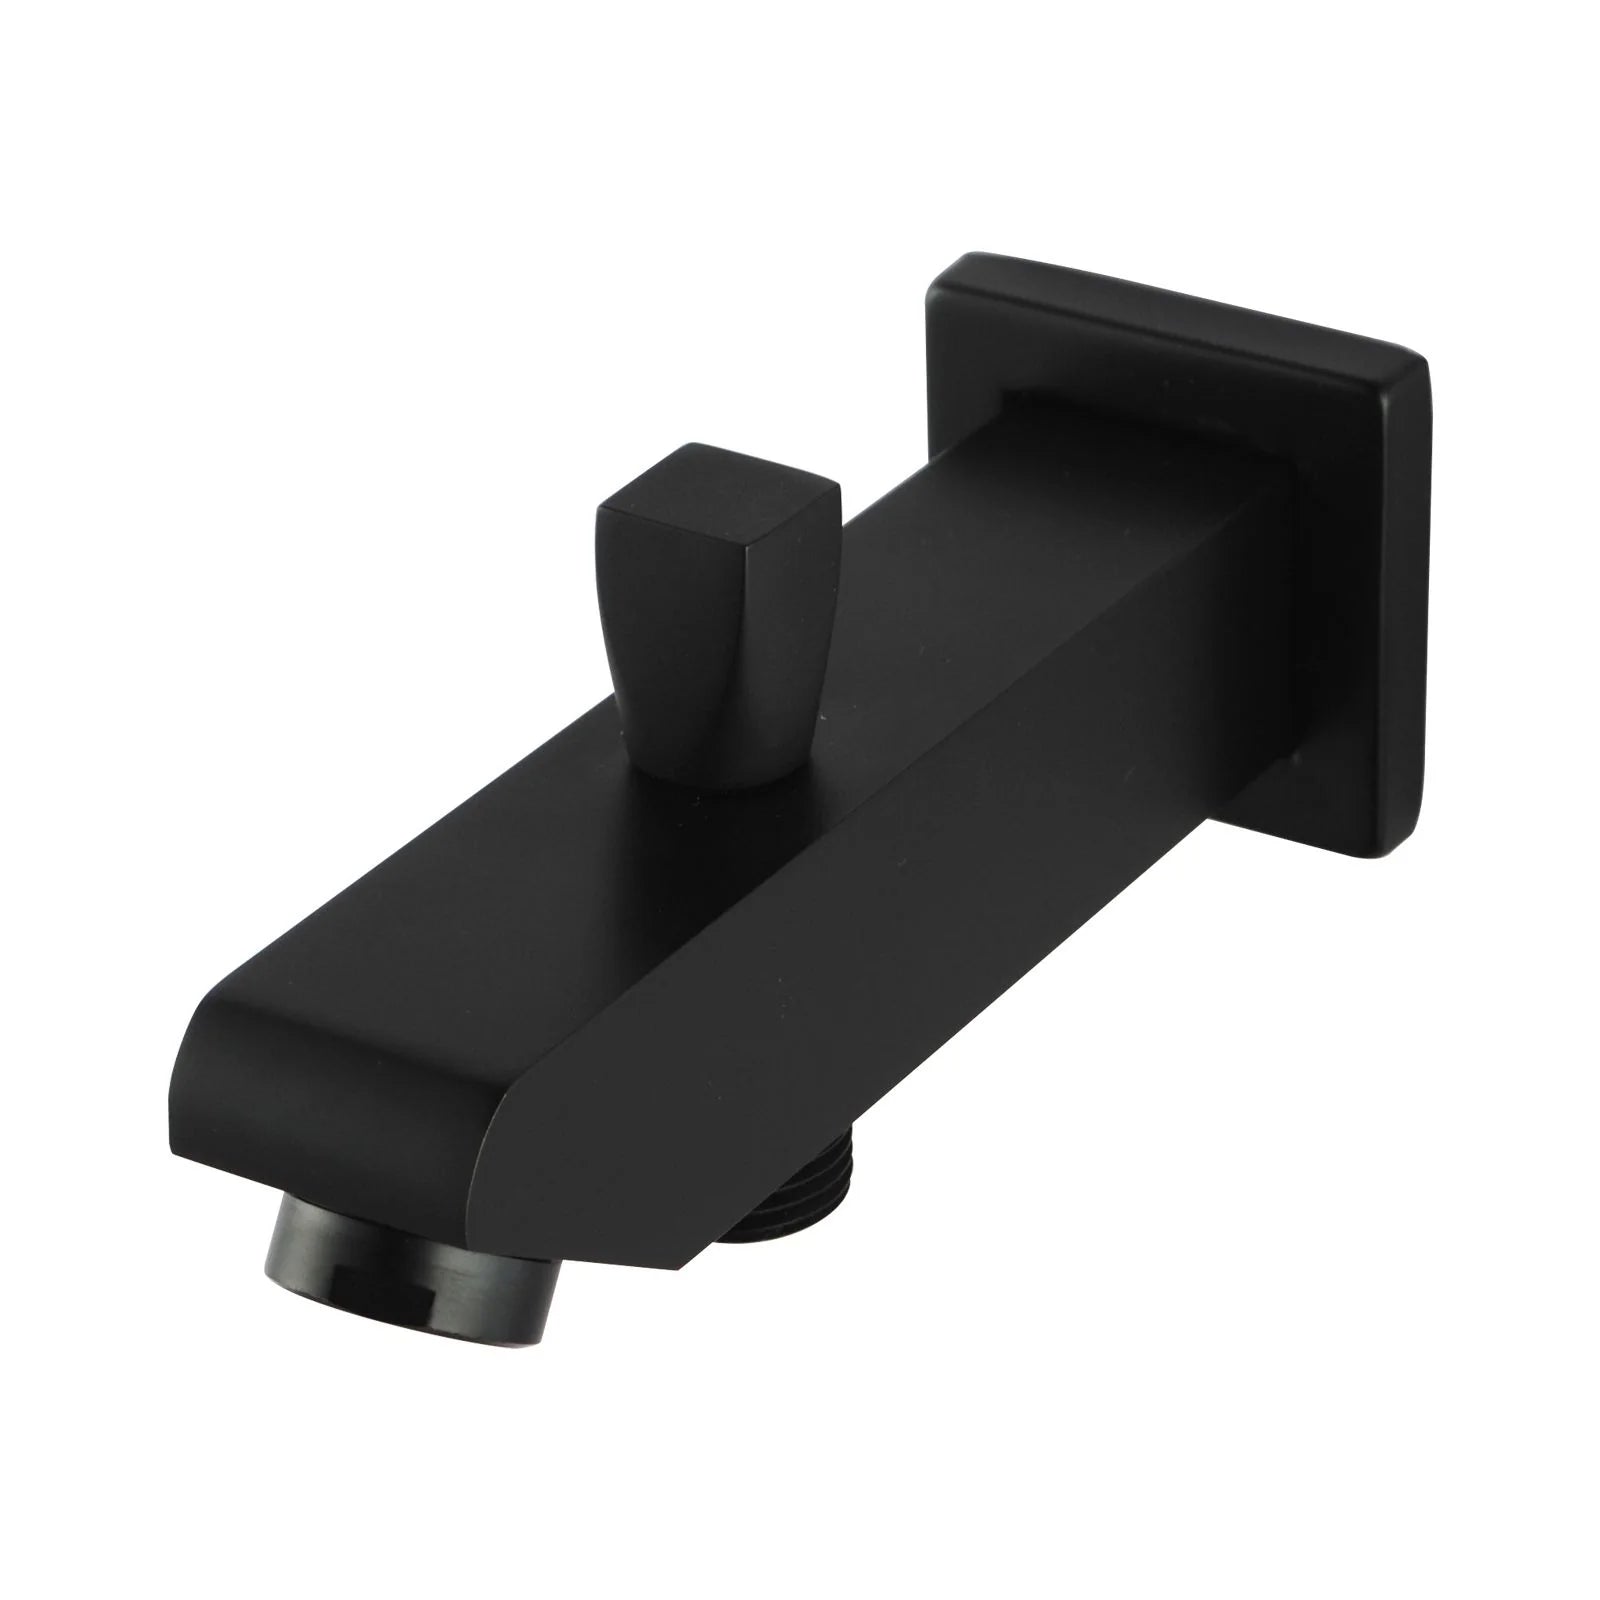 Blaze Wall Spout with Diverter: Stylish Addition for Bathtub or Basin-Black-OX0011_BS